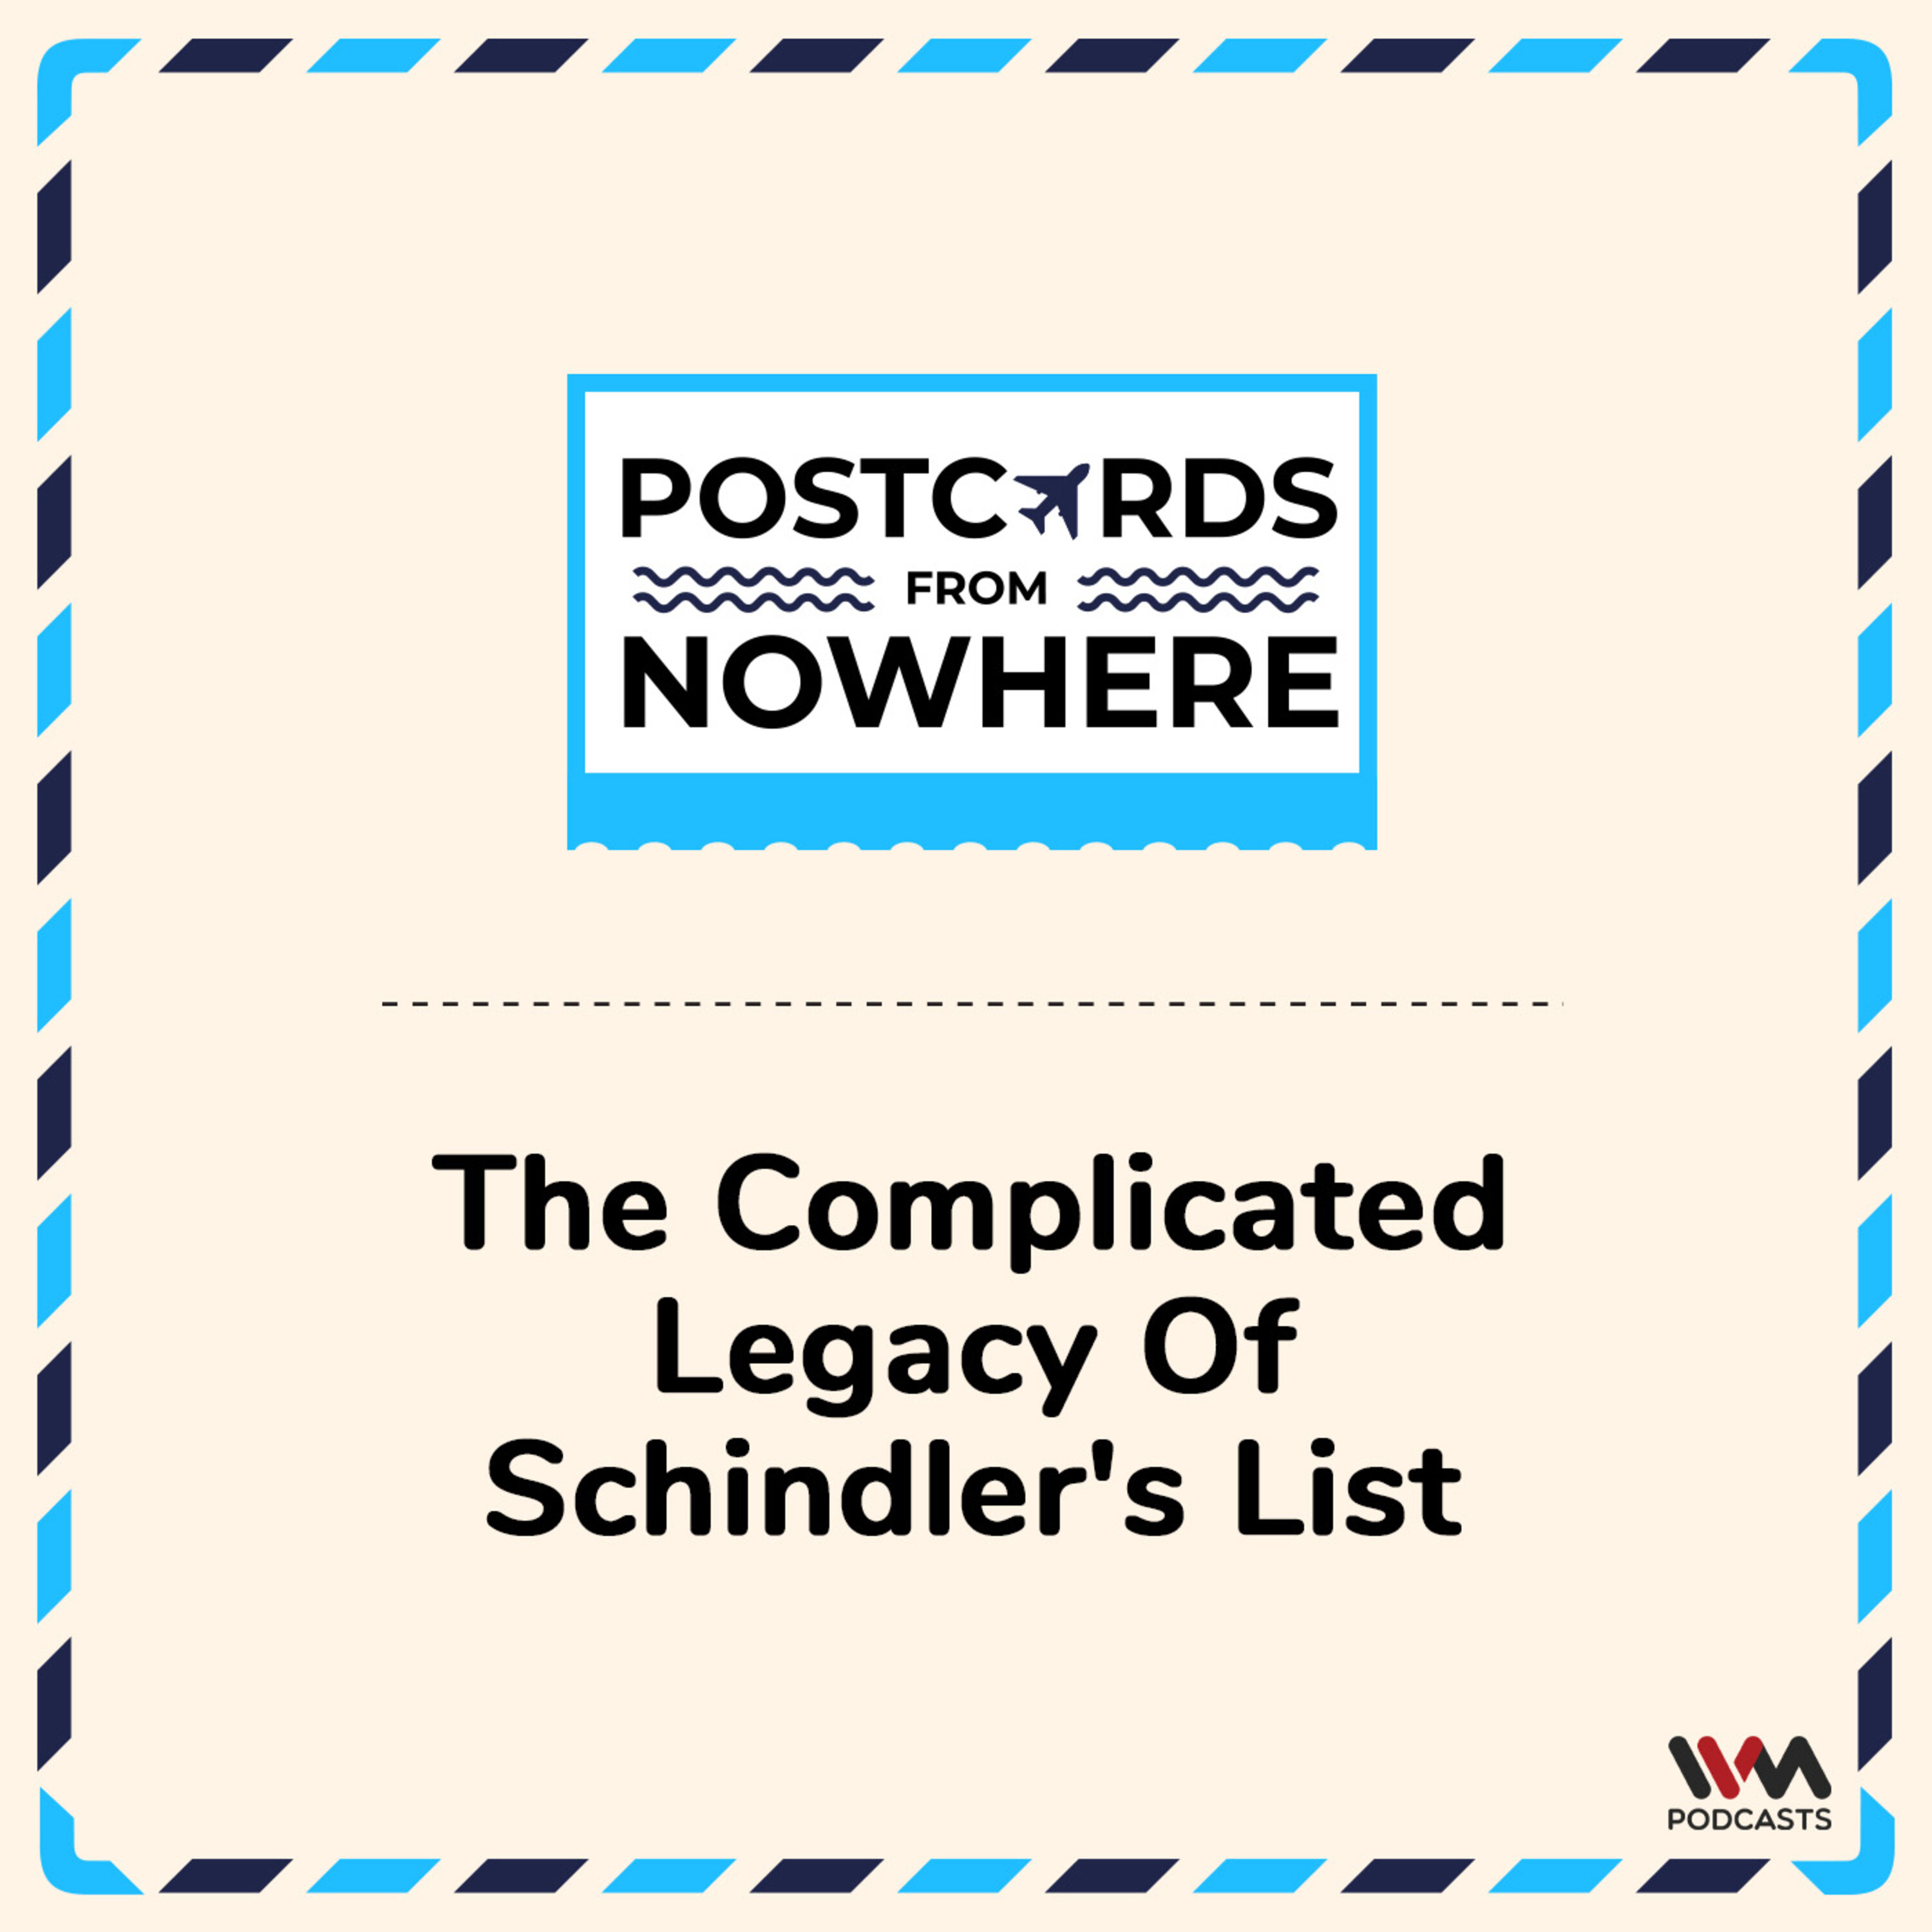 The complicated legacy of Schindler's List